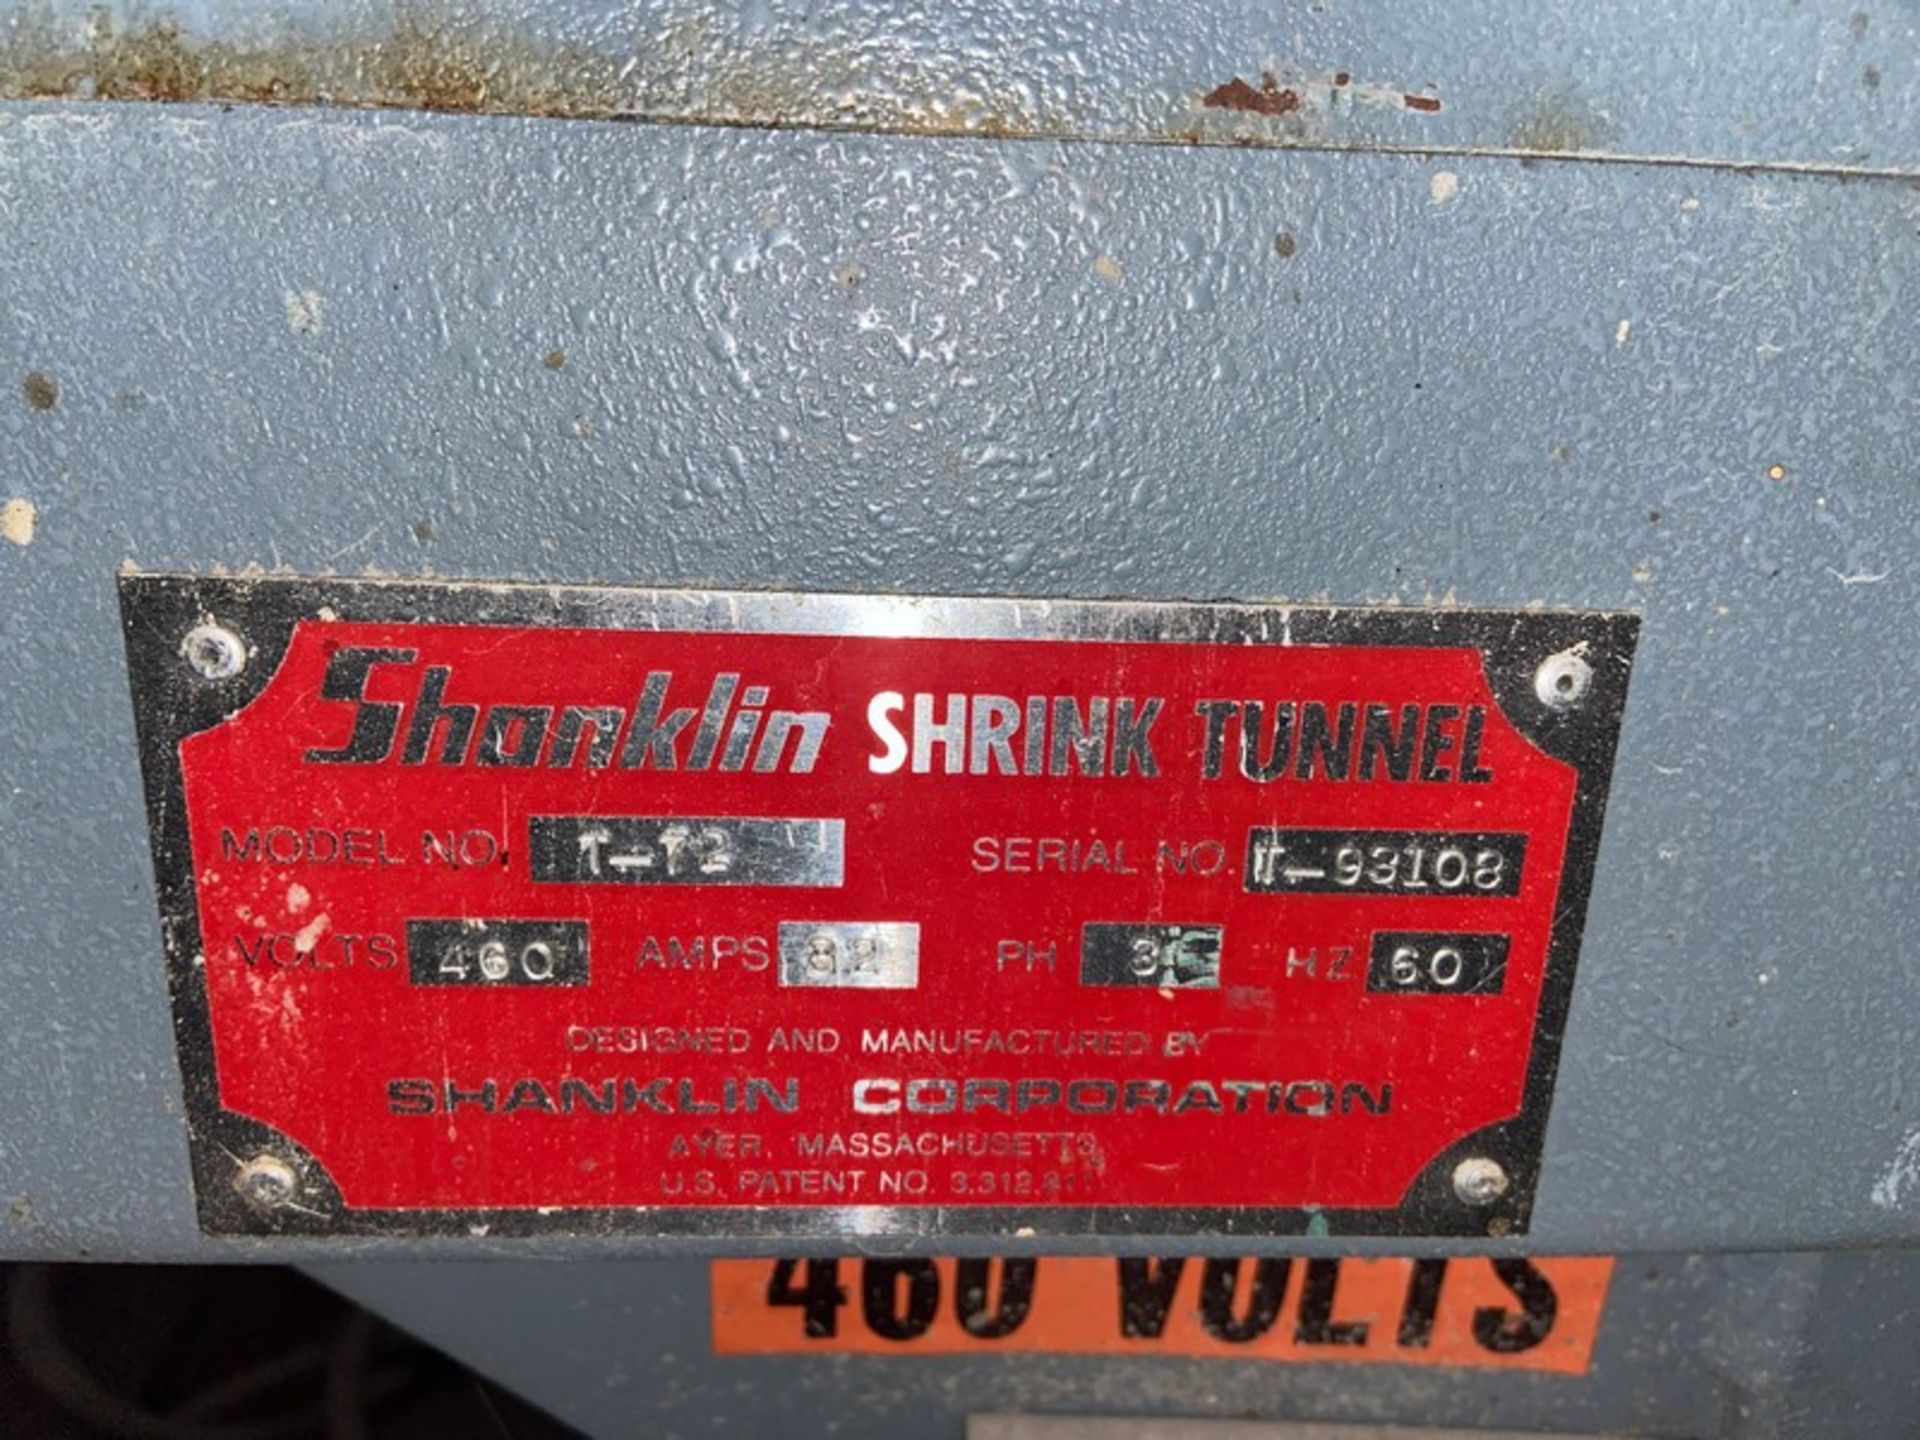 Shanklin Shrink Wrap Tunnel, M/N T-72, S/N T-93108, 460 Volts, 3 Phase, with Aprox. 21" W x 8" H, - Image 3 of 6